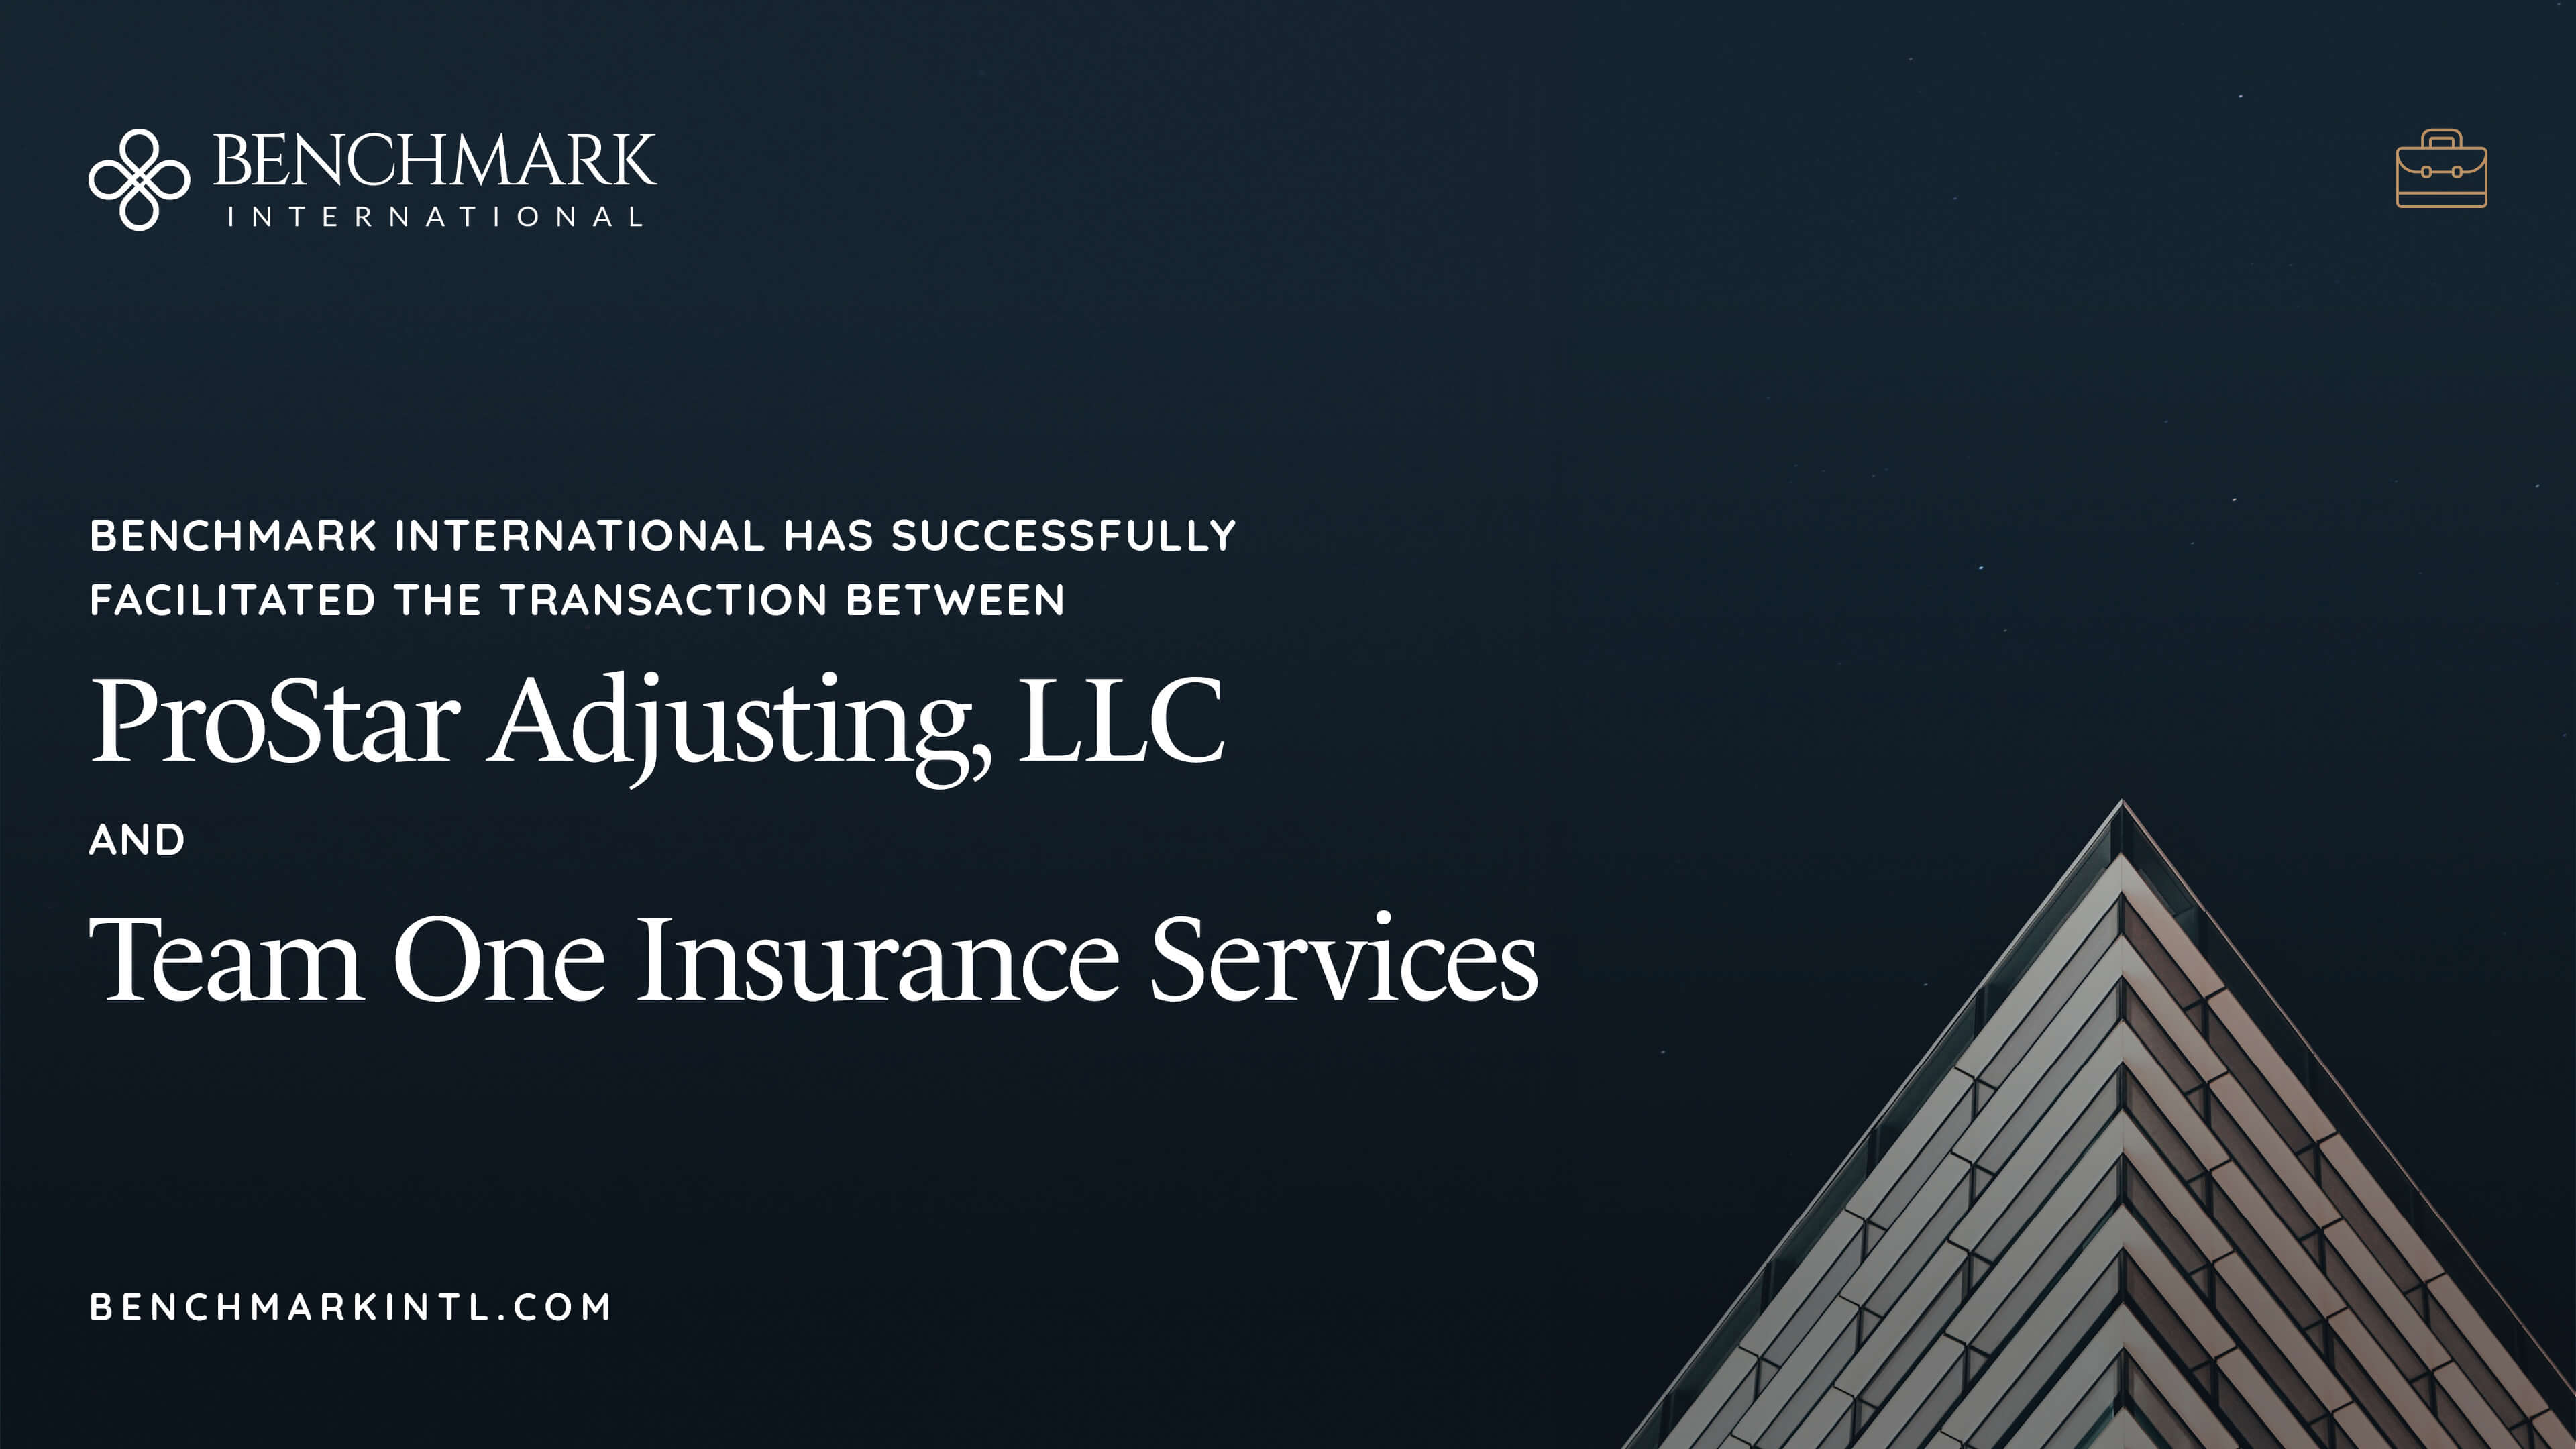 Benchmark International Has Successfully Facilitated The Transaction Between ProStar Adjusting, LlC And Team One Insurance Services